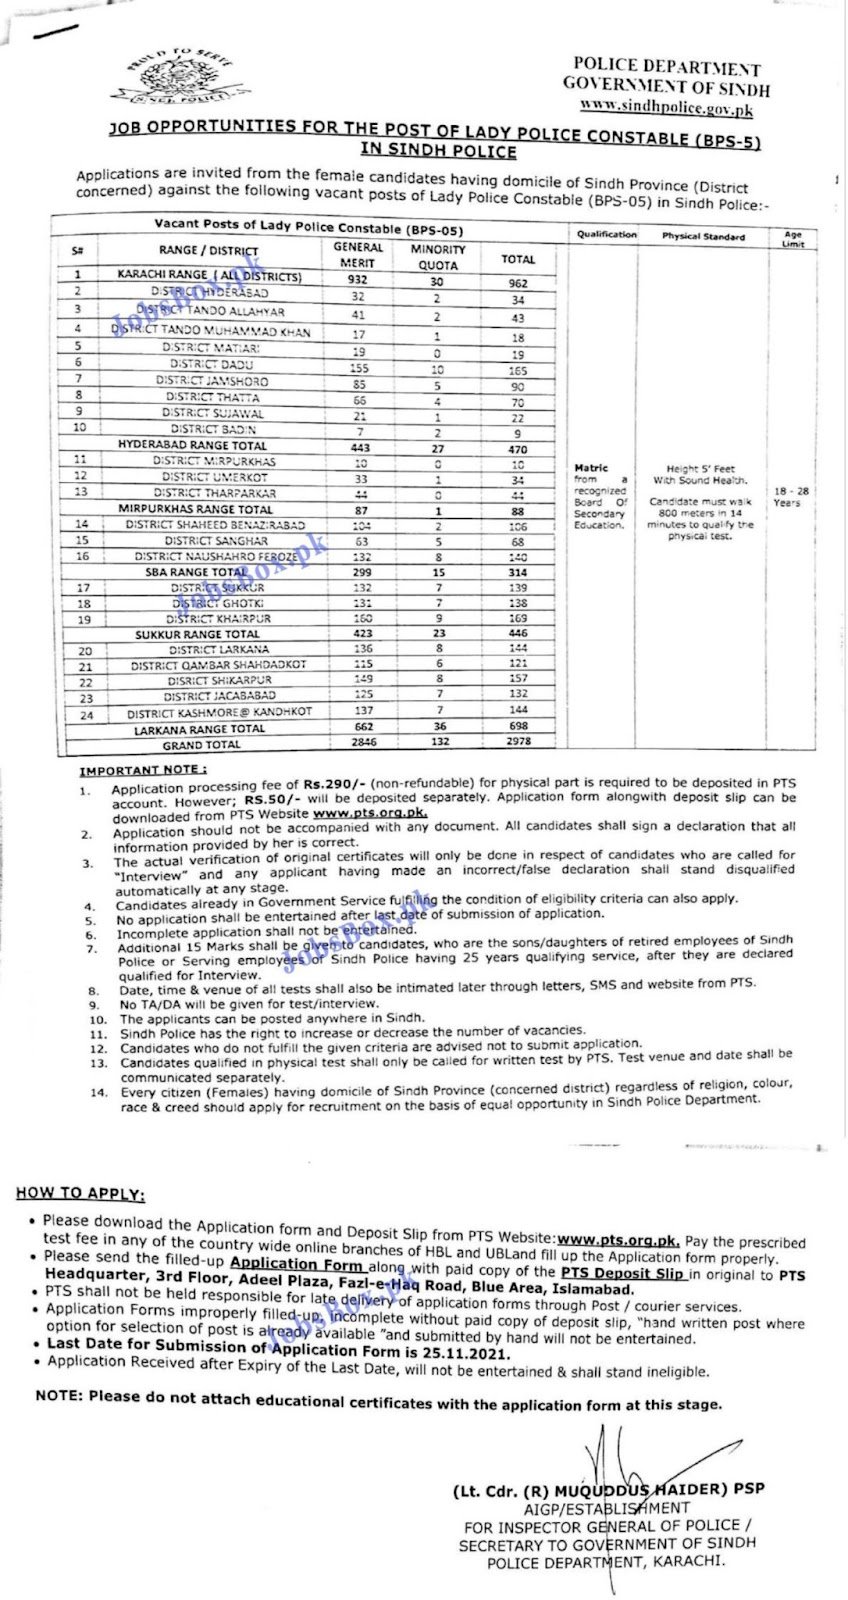 Sindh Police Jobs 2021 Download Application form via PTS